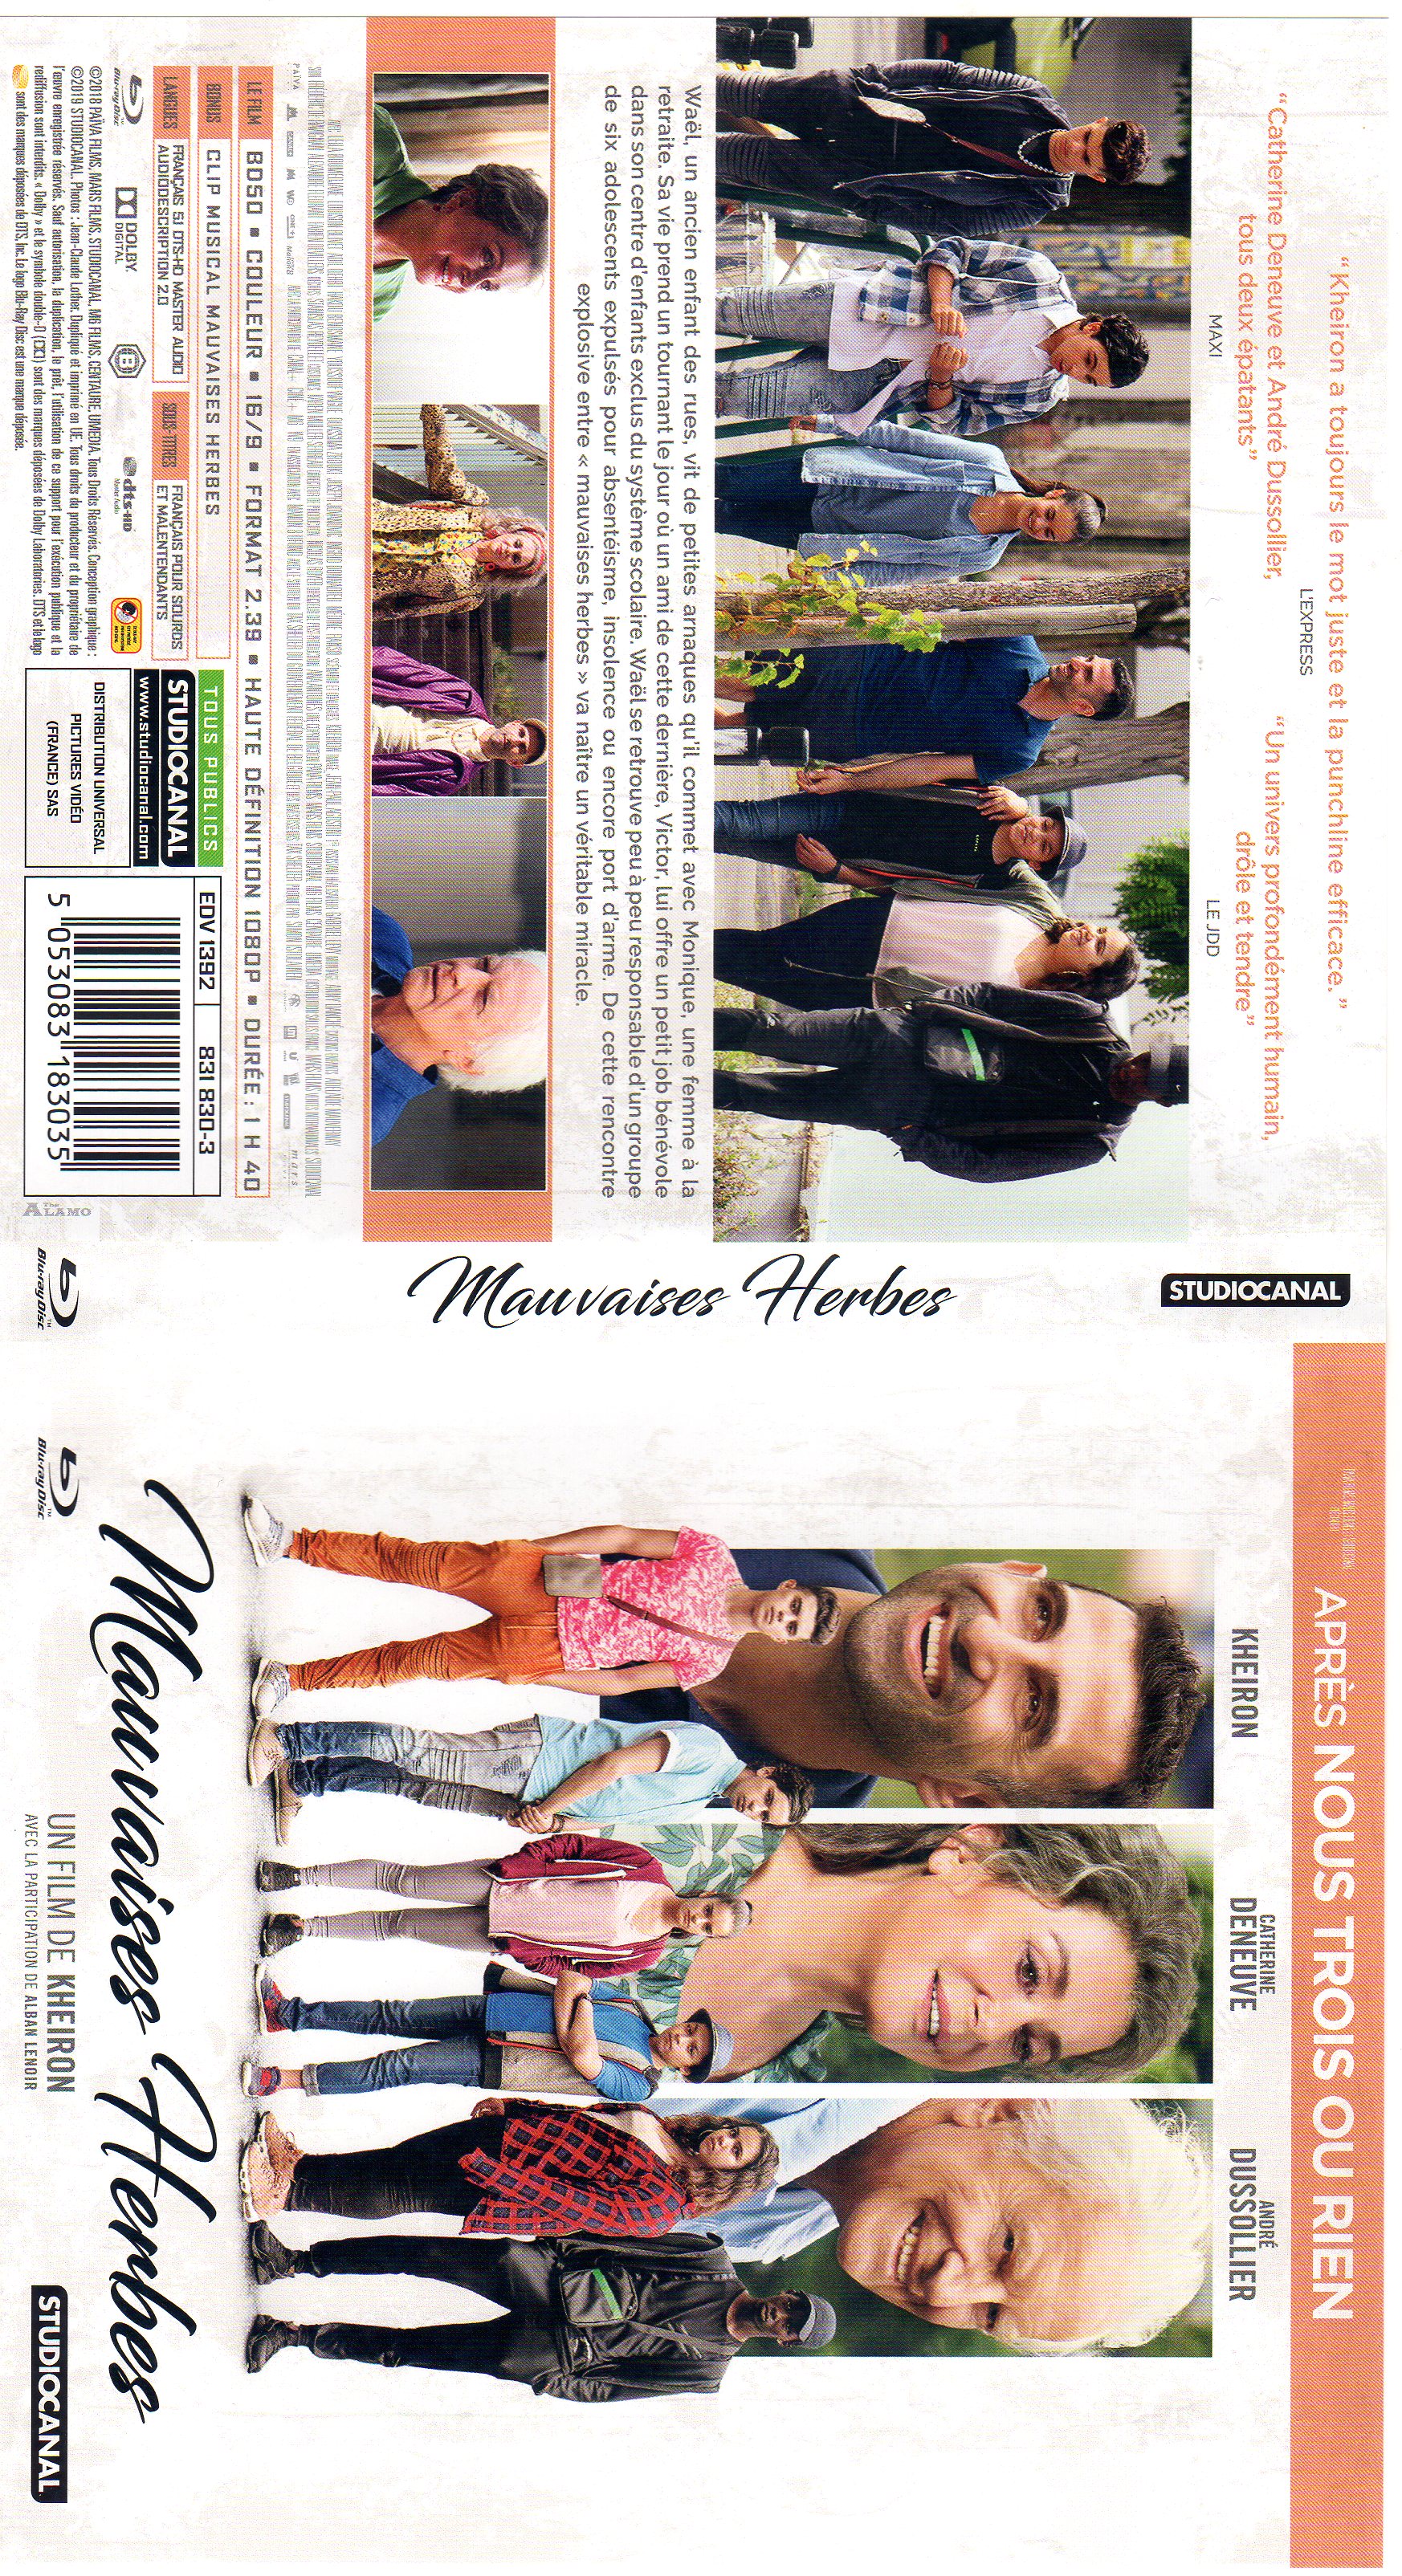 Jaquette DVD Mauvaises herbes (BLU-RAY)